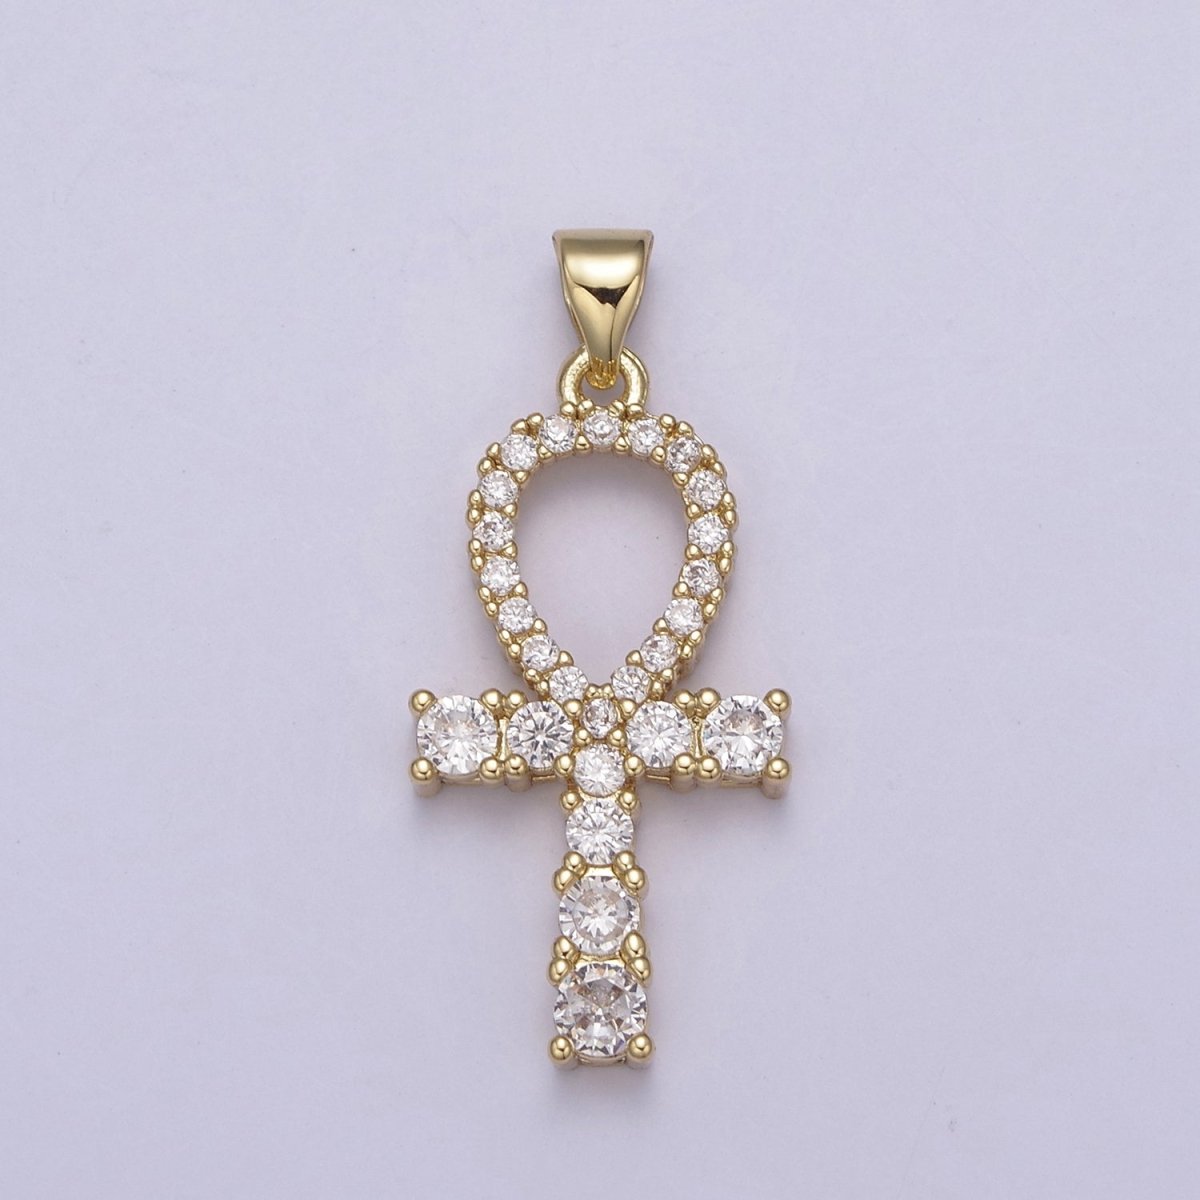 Micro Pave Ankh Pendant 14K Gold Filled Talisman Ankh Cross Charm For Wholesale and Jewelry Supplies H-724 - DLUXCA